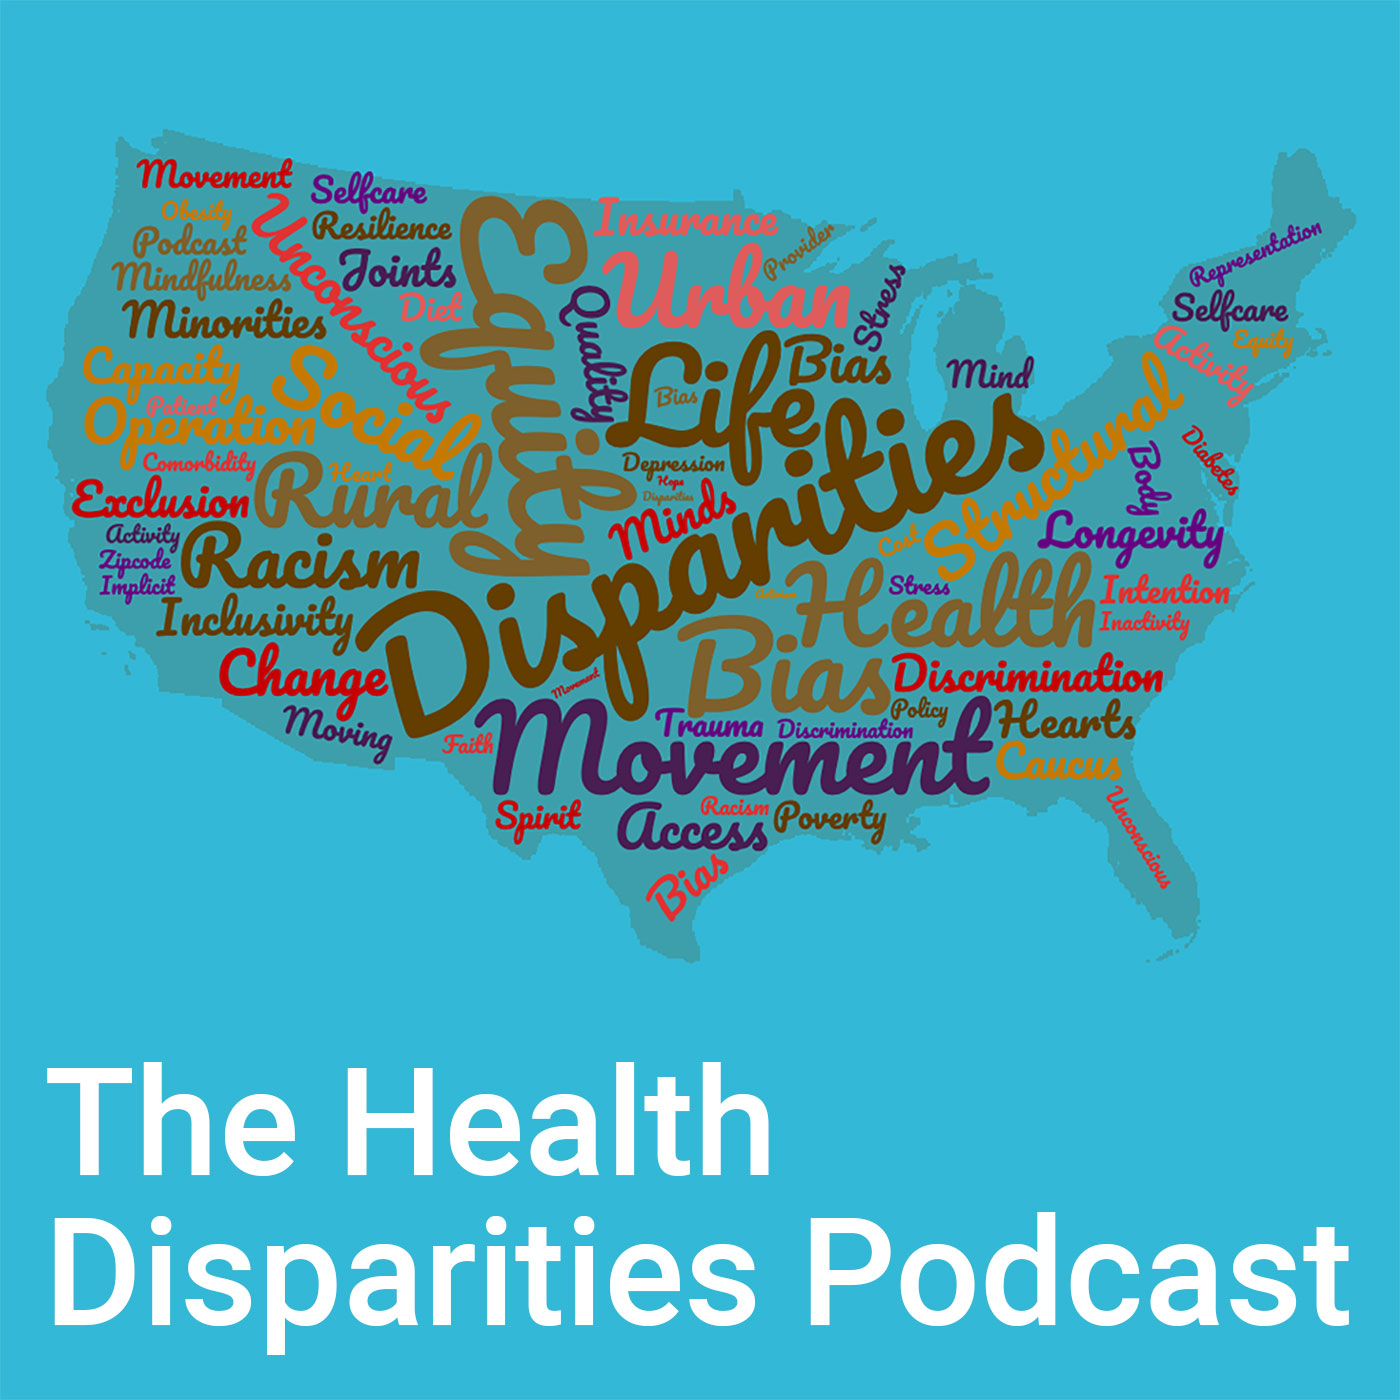 The Health Disparities Podcast podcast show image